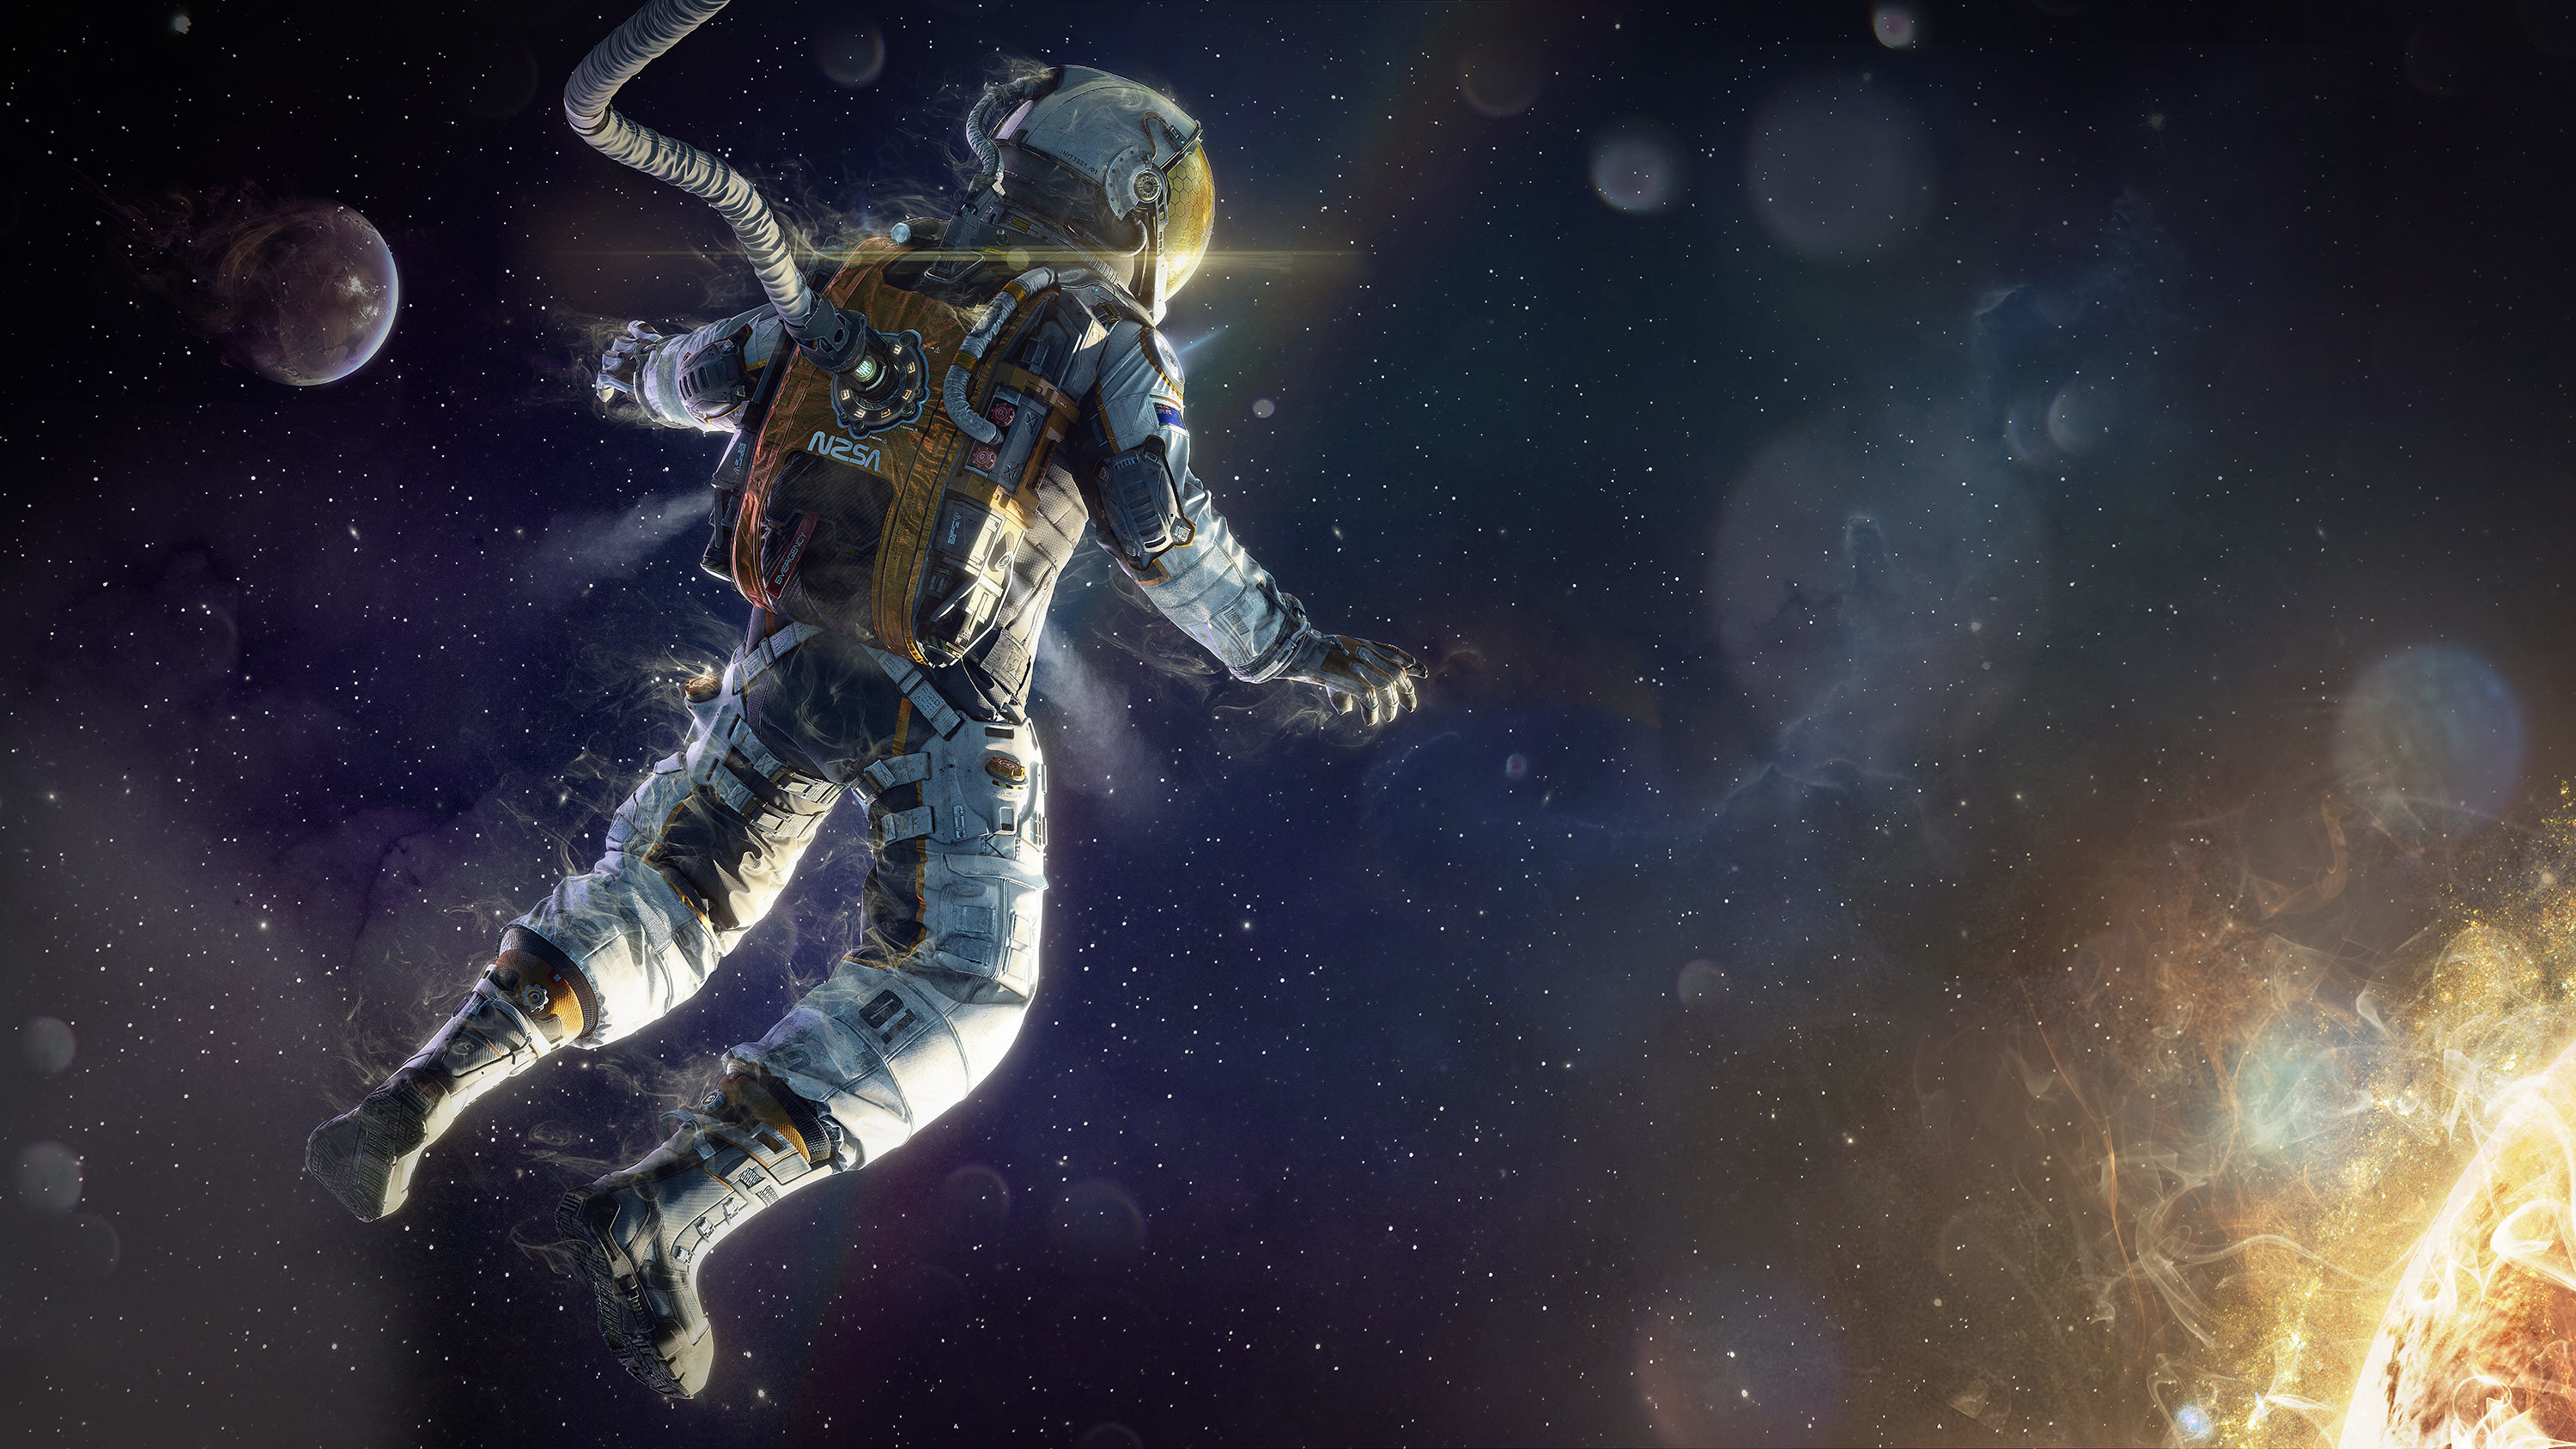 Astronaut on the Moon Wallpaper (65+ images)